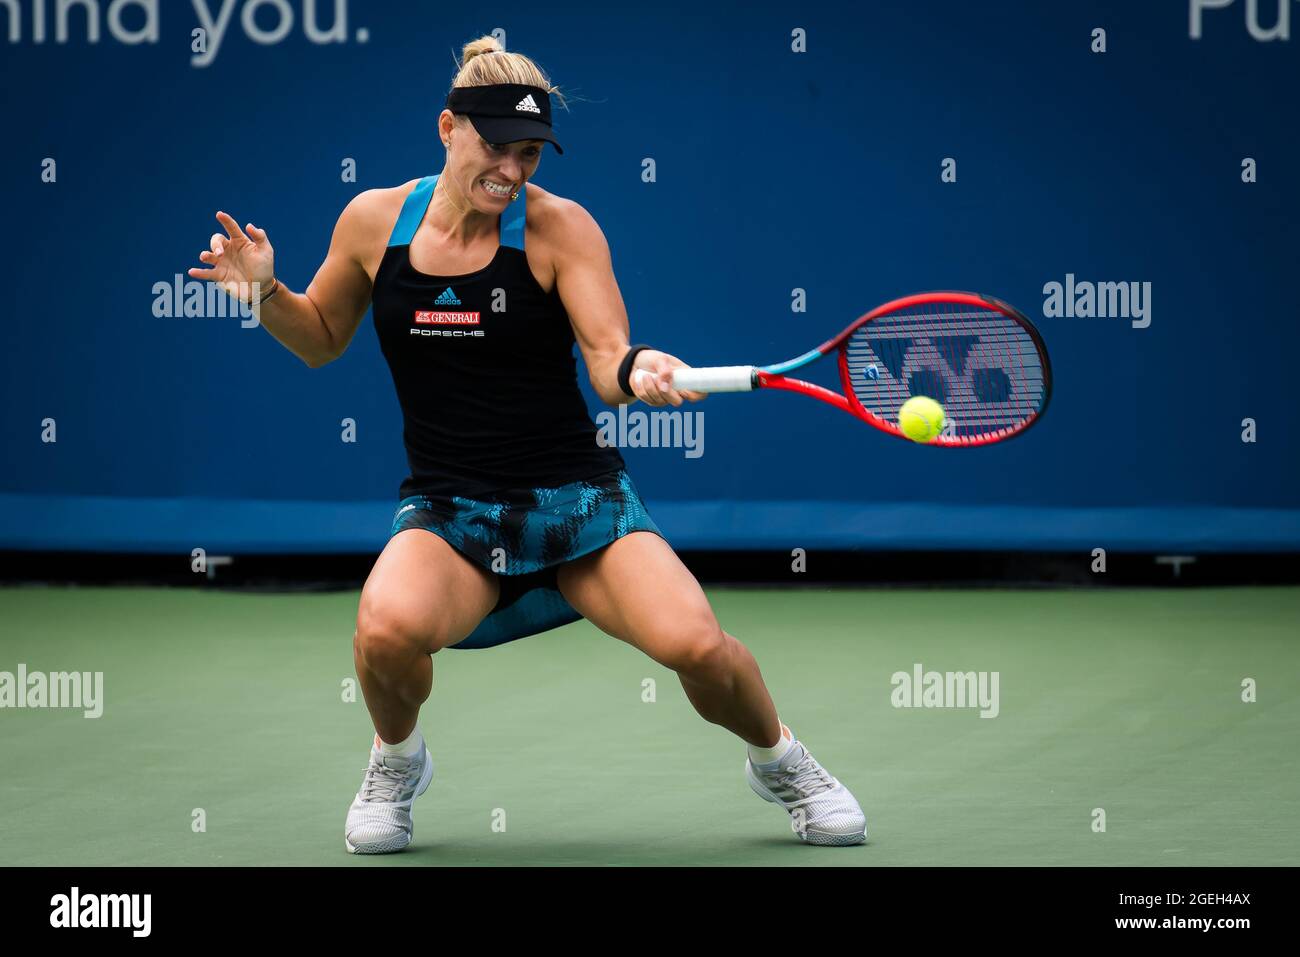 Cincinnati, USA. 19th Aug, 2021. Angelique Kerber of Germany in action  during the third round at the 2021 Western & Southern Open WTA 1000 tennis  tournament against Jelena Ostapenko of Latvia on